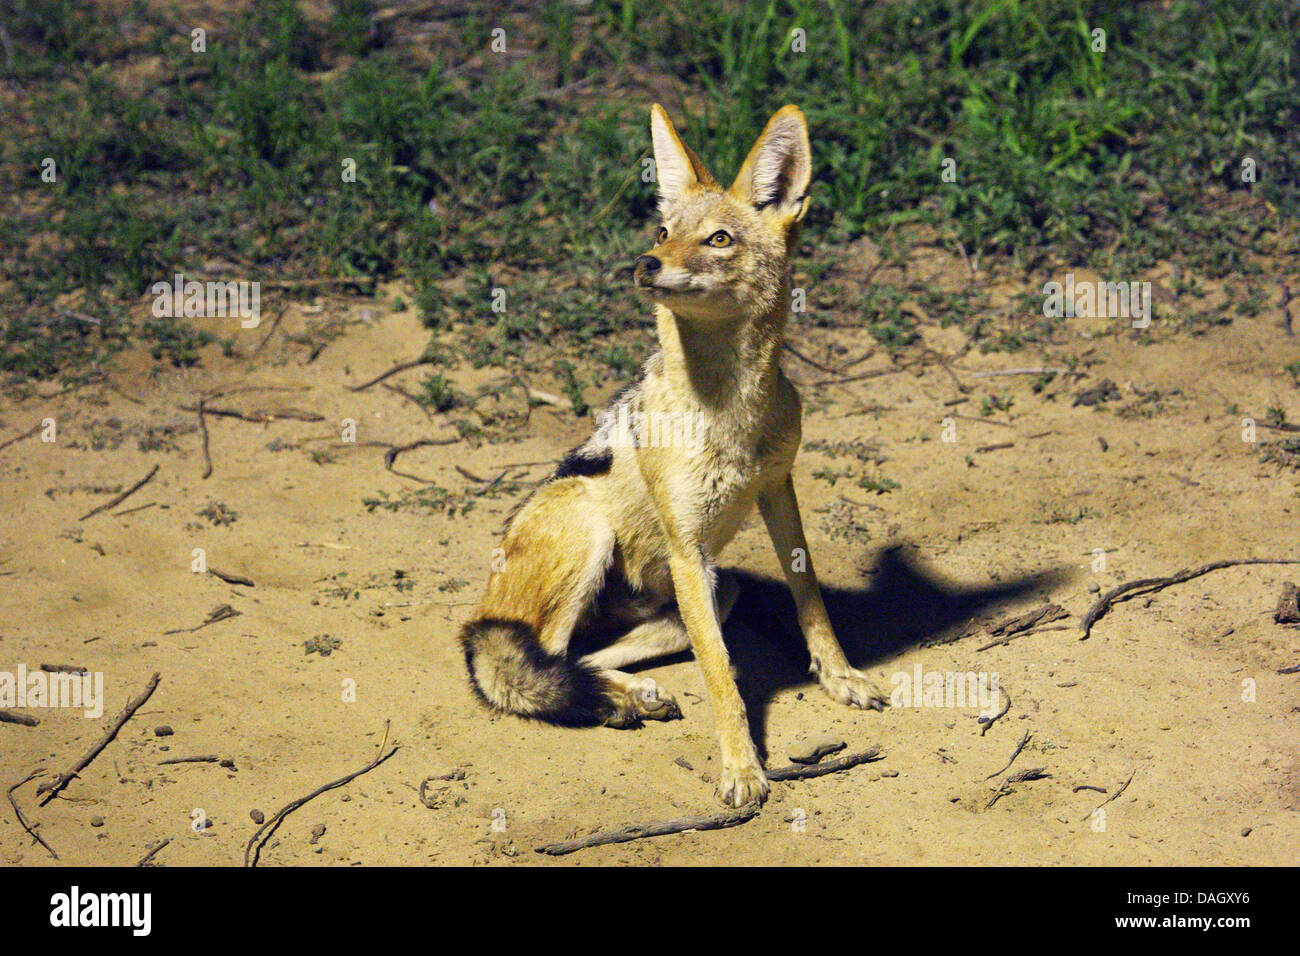 black-backed jackal (Canis mesomelas), sitting illuminated at night on a soil ground, South Africa, Kgalagadi Transfrontier National Park Stock Photo